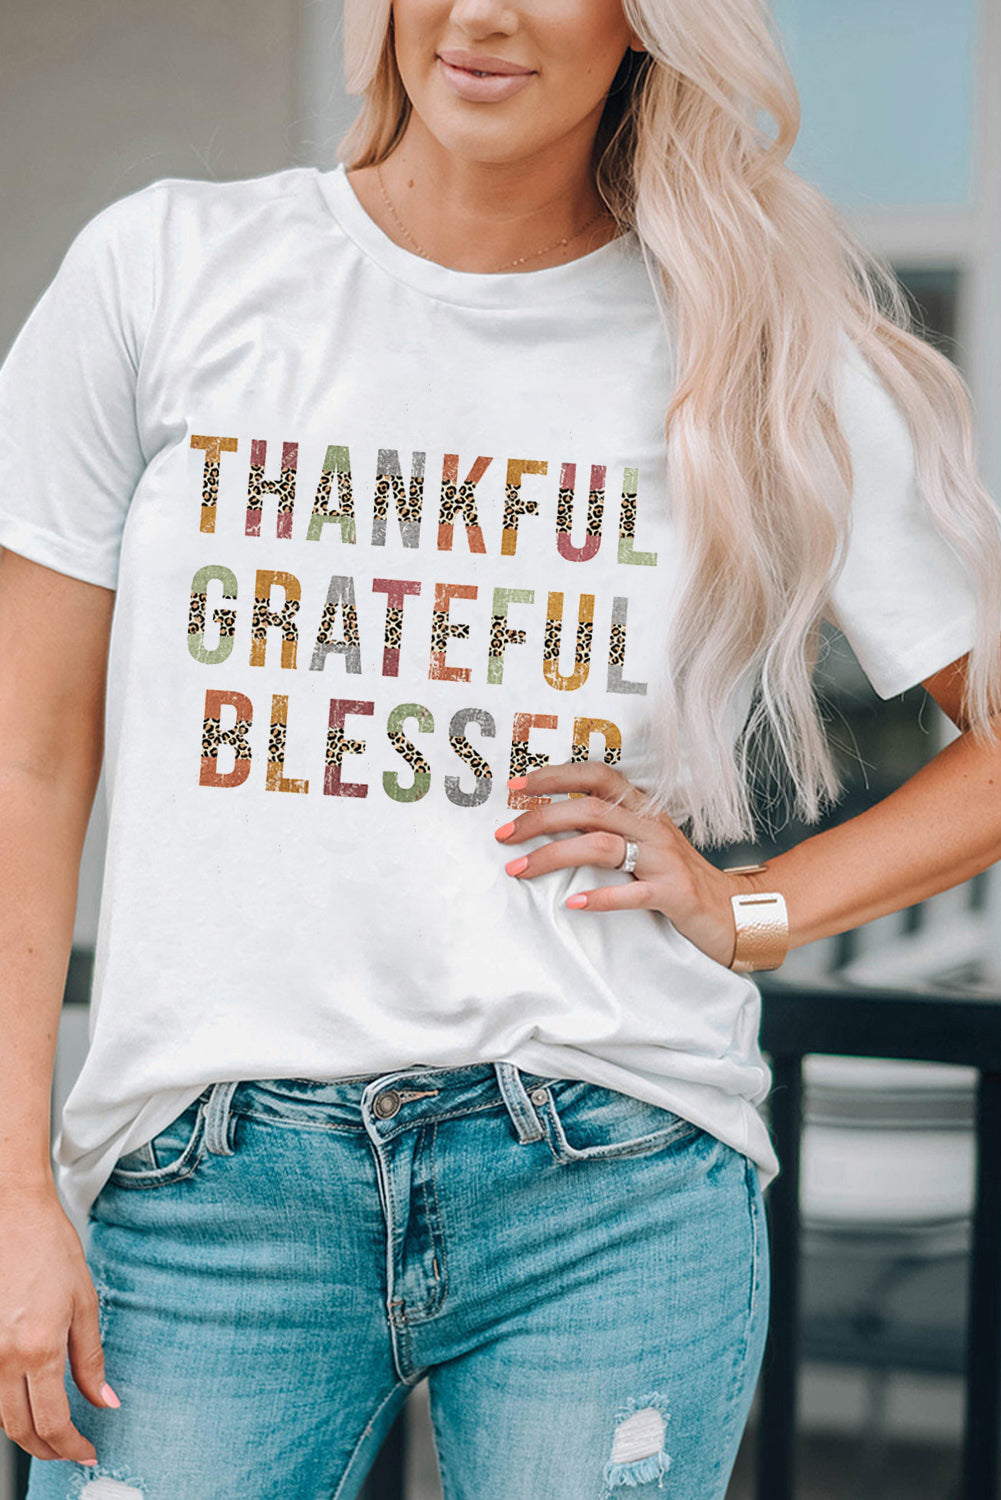 White Leopard Patchwork Thankful Grateful Blessed Graphic T Shirt Graphic Tees JT's Designer Fashion